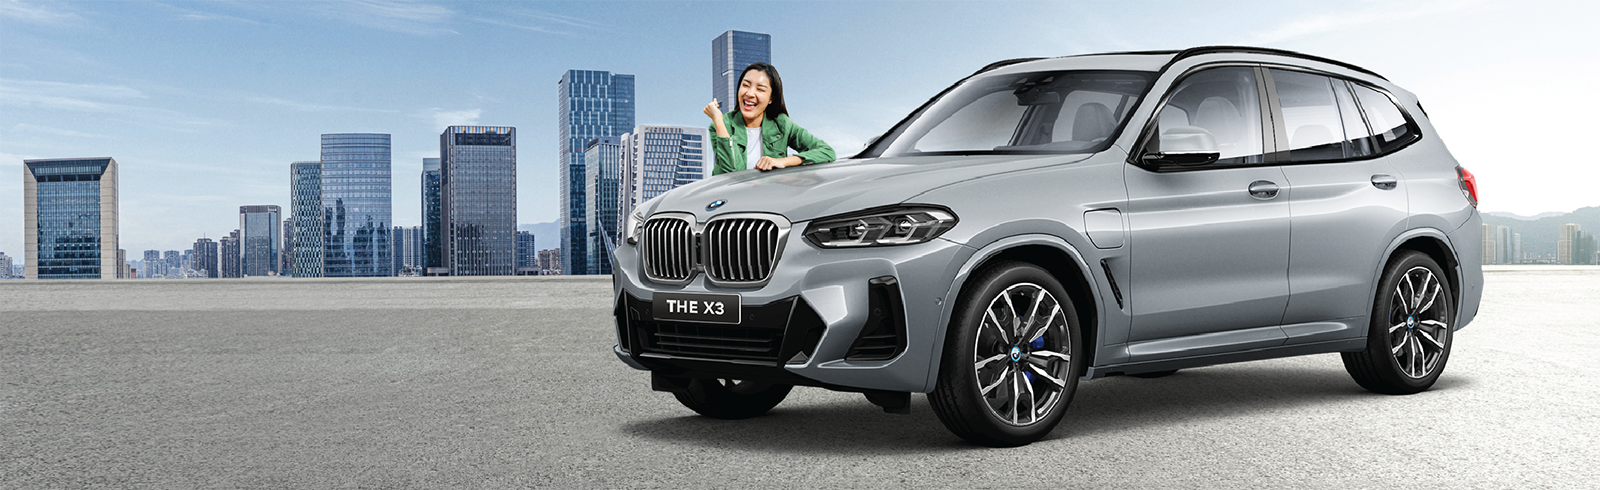 Spend your way to win a BMW X3